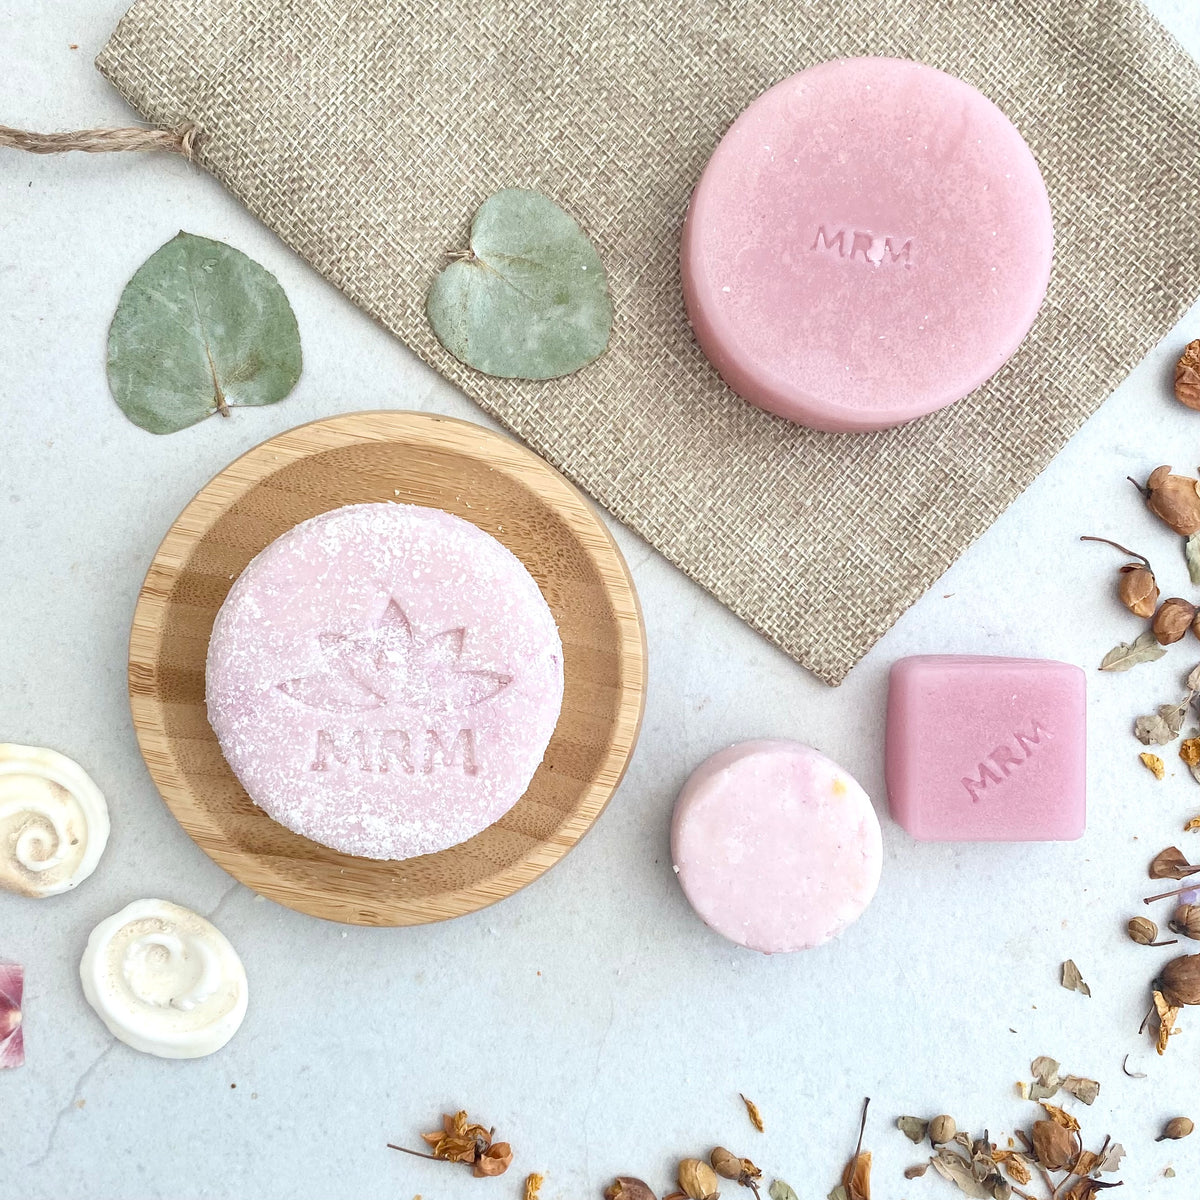 Shampoo and Conditioner Bars for Coloured Hair